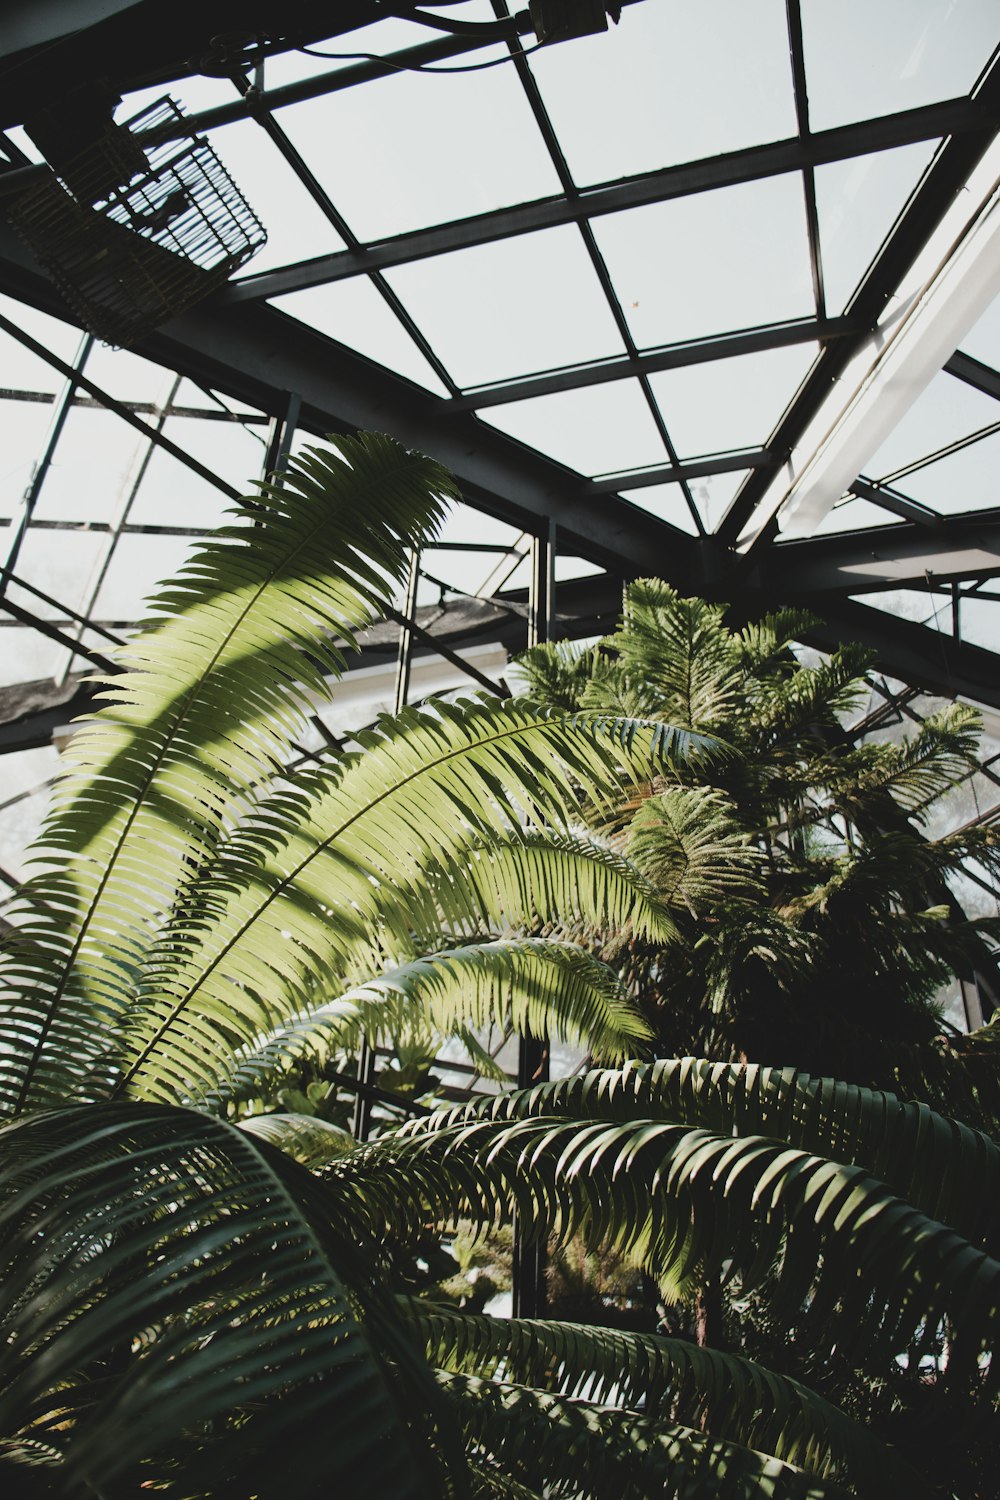 a view of a palm tree in a greenhouse